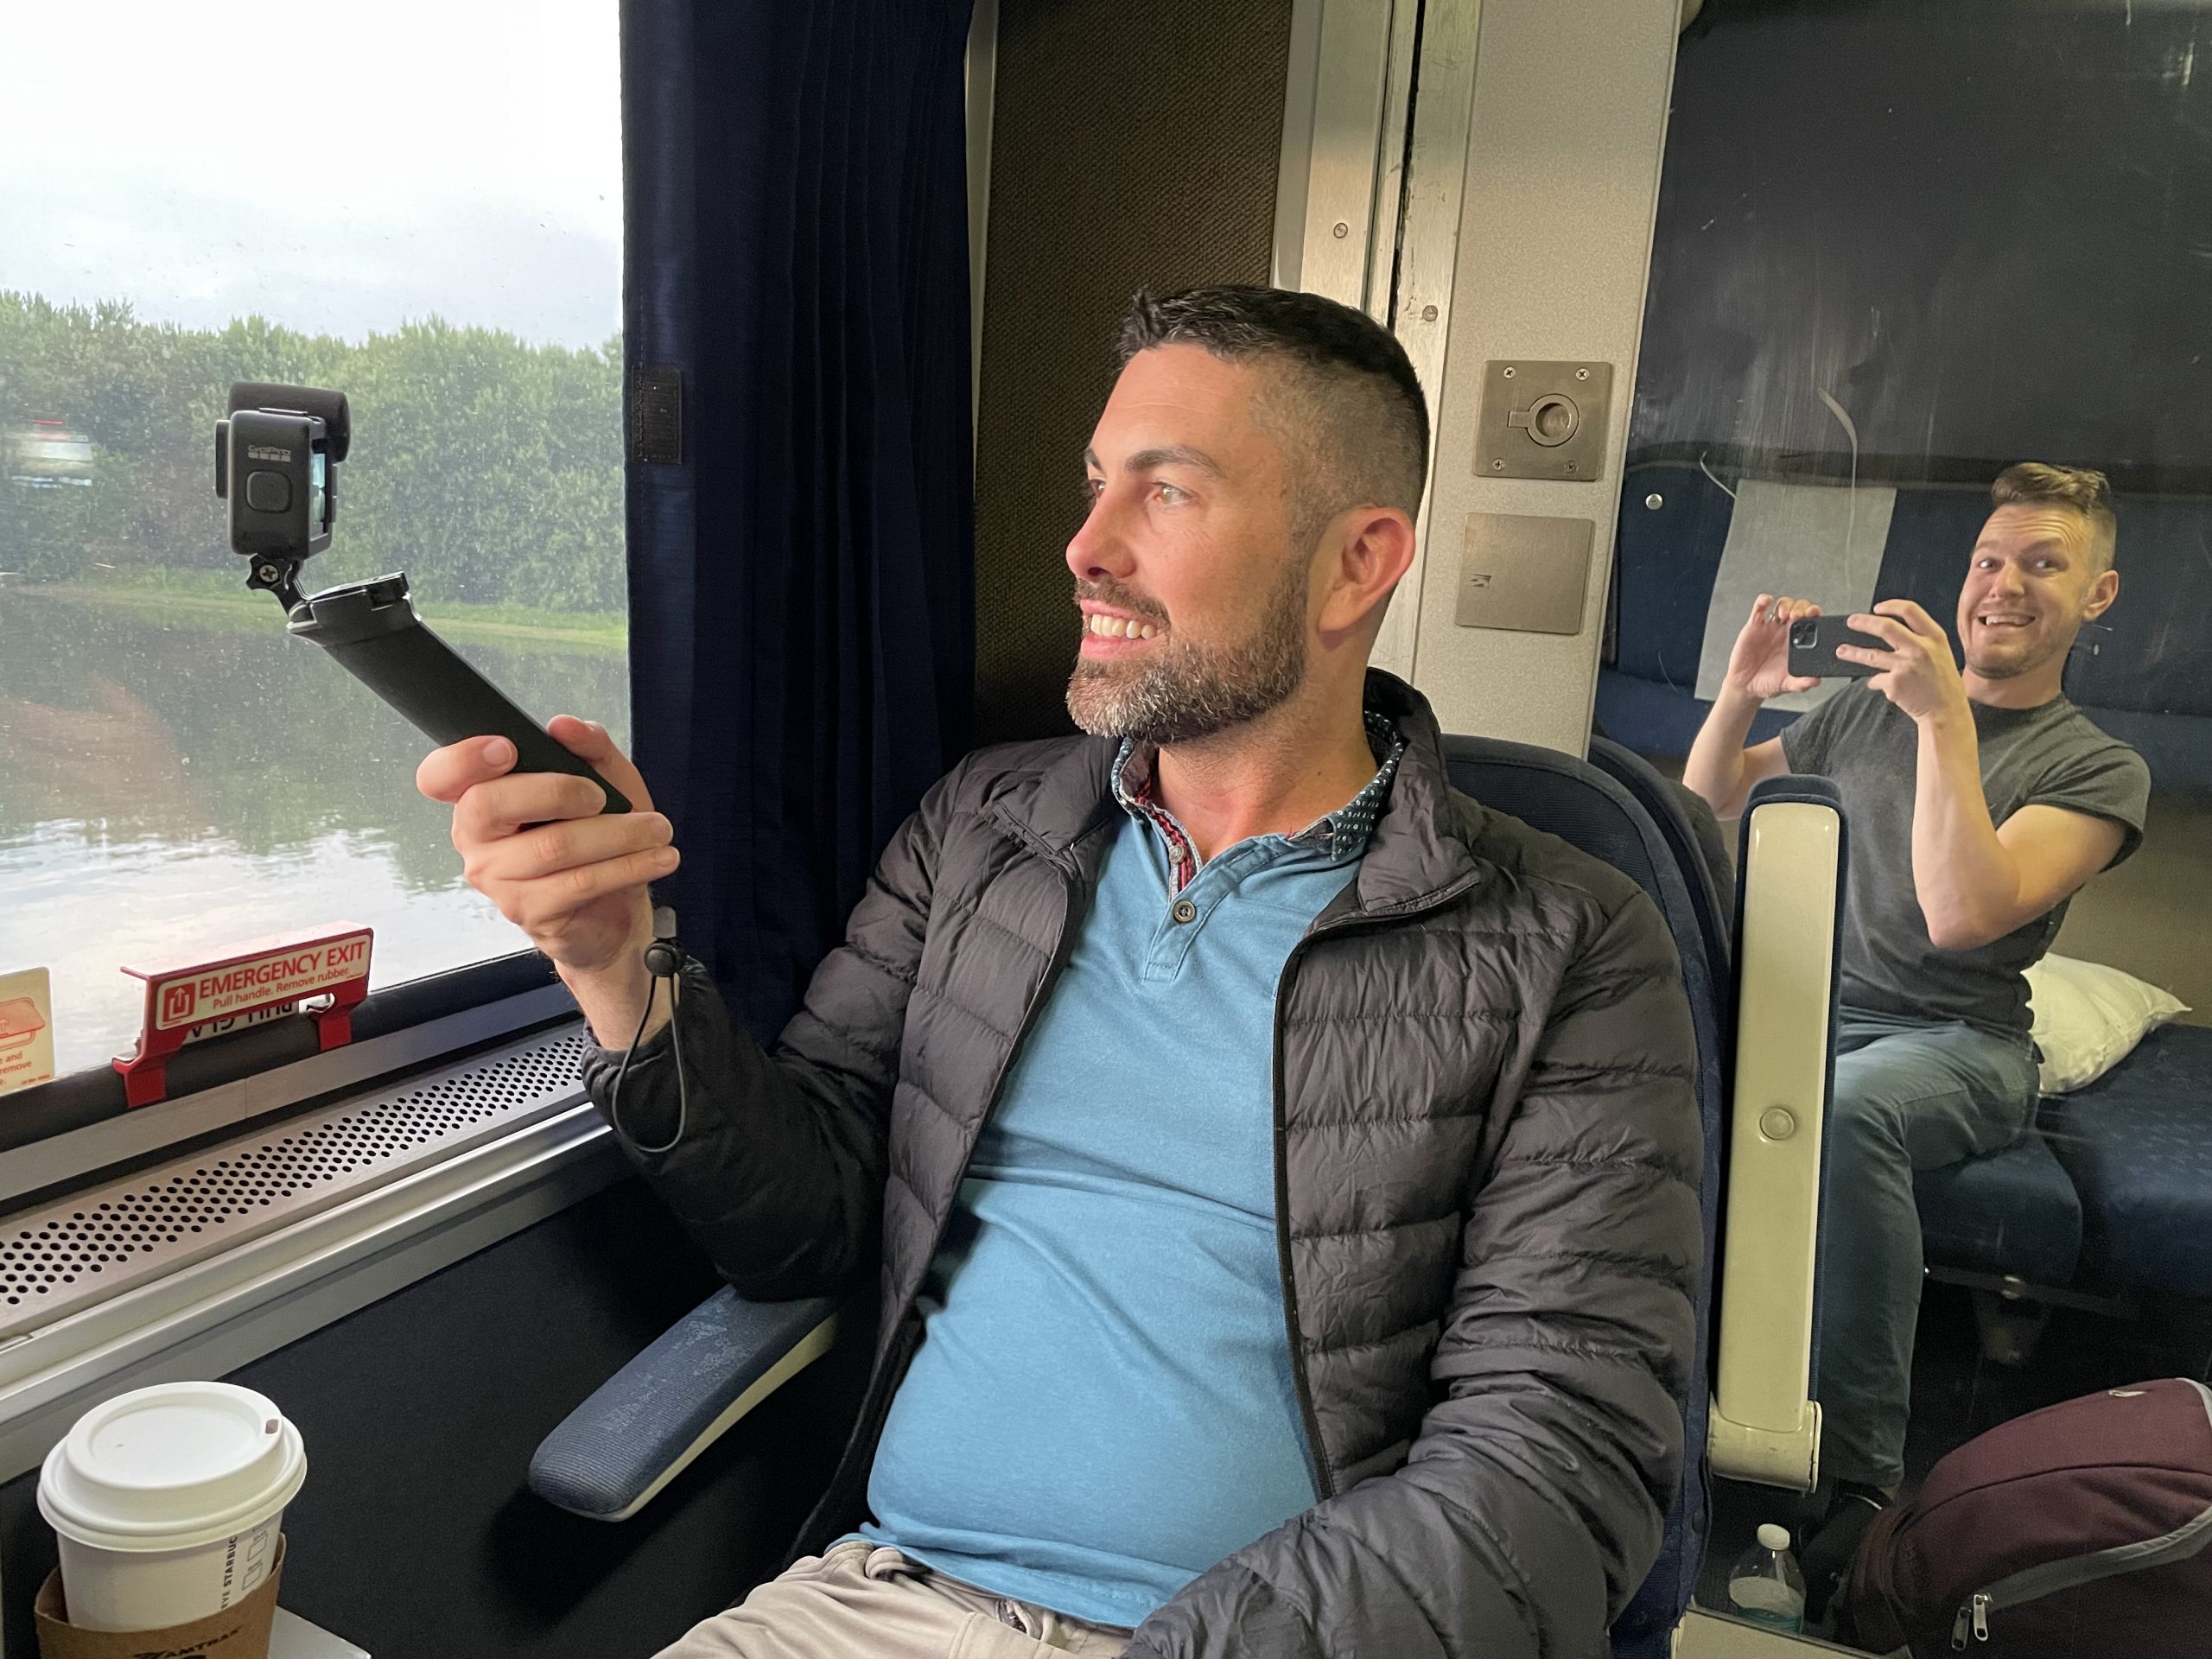 Two Gay Expats - Amtrak Empire Builder - One Bedroom Sleeper Car